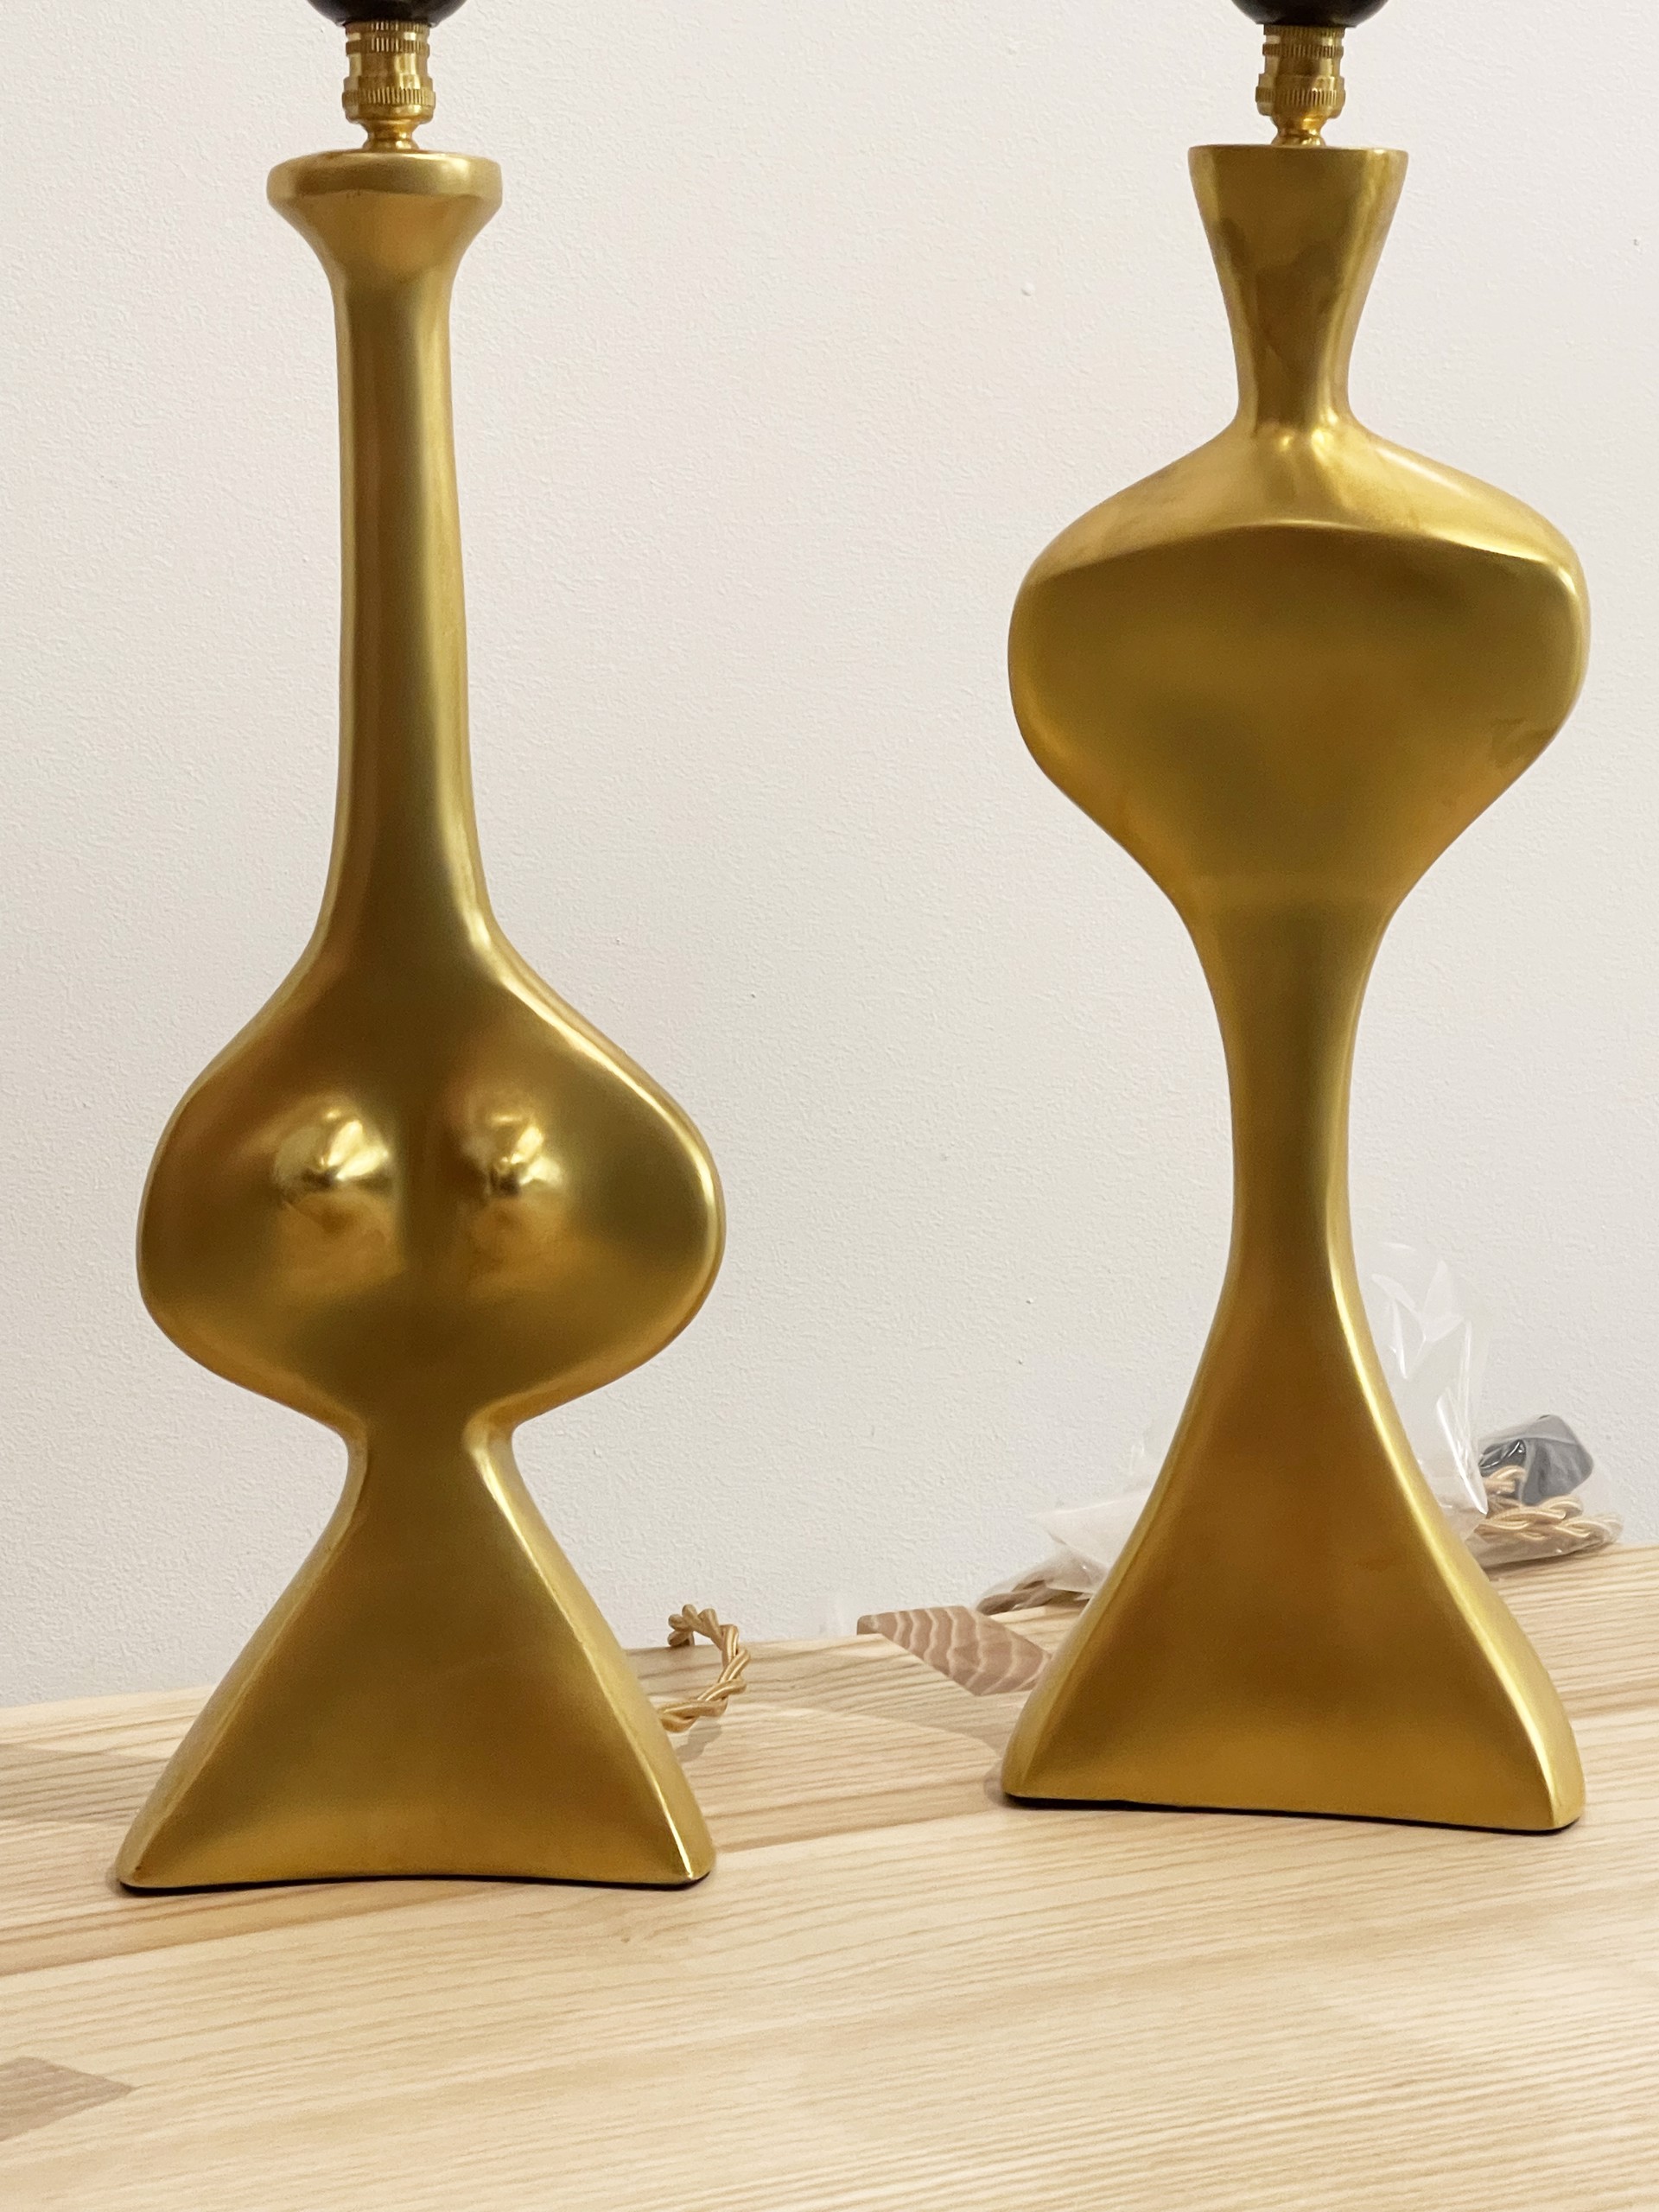 "Adam & Eve" Gold plated by Jacques Jarrige